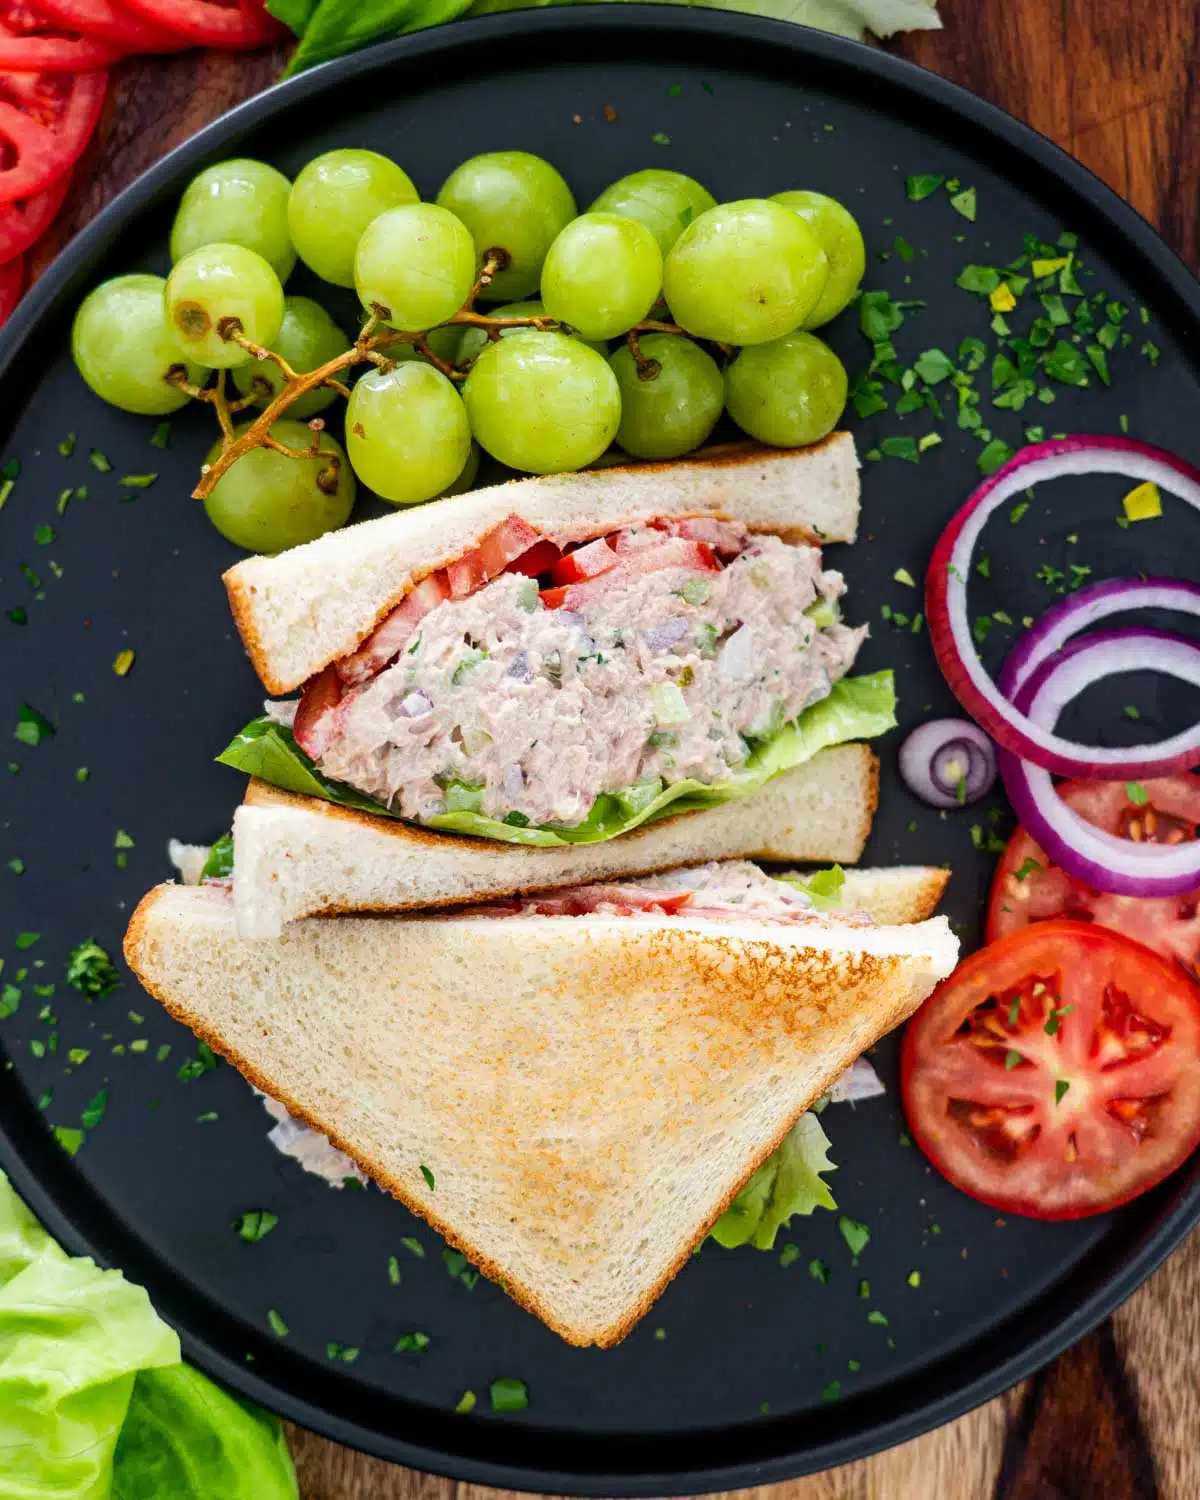 tuna salad sandwich with lettuce and tomatoes and grapes on the side on a black plate.